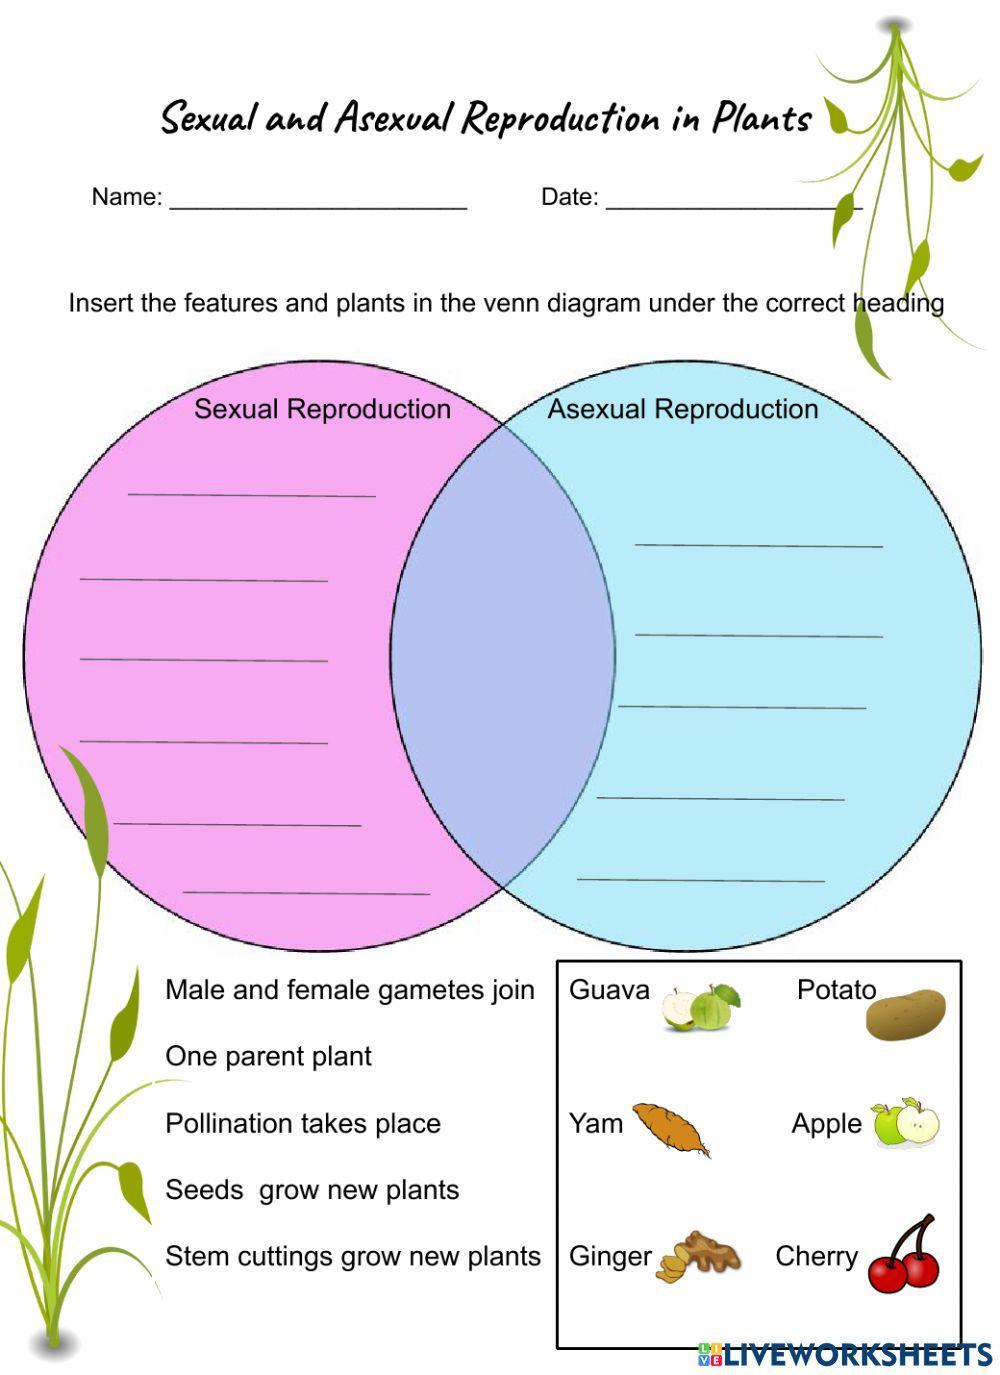 Sexual and Asexual Reproduction in Plants